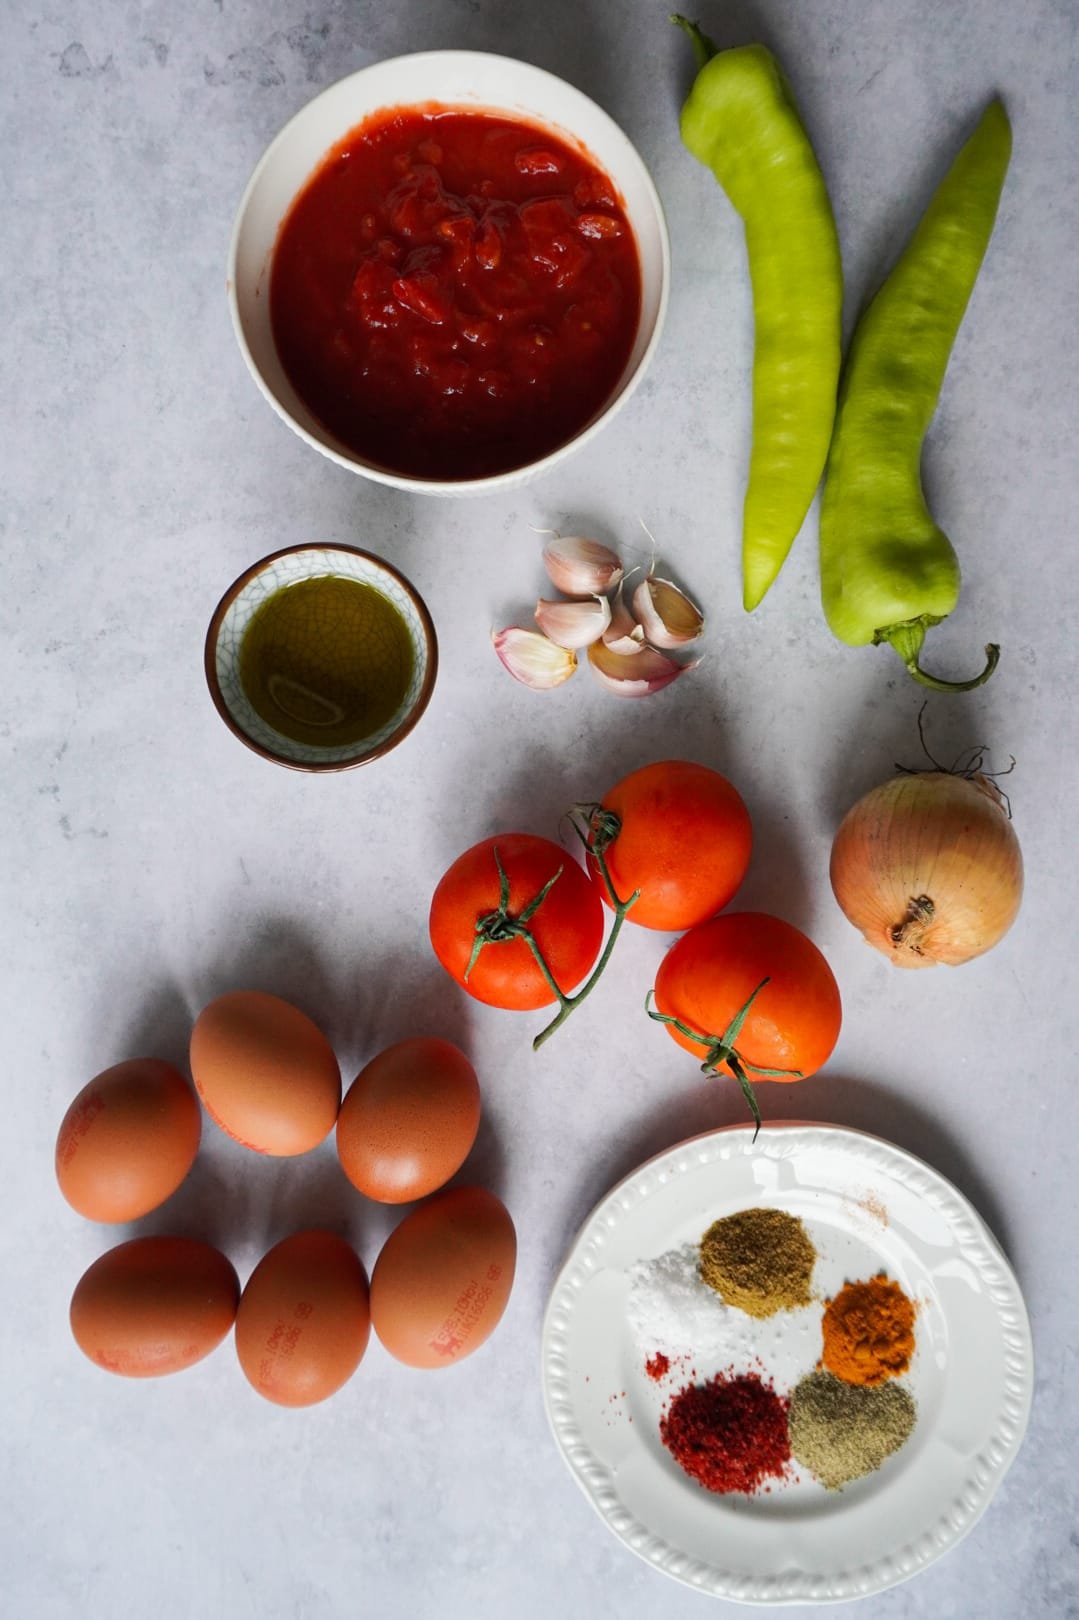 The ingredients you need to make your very own shakshuka dish for your family.